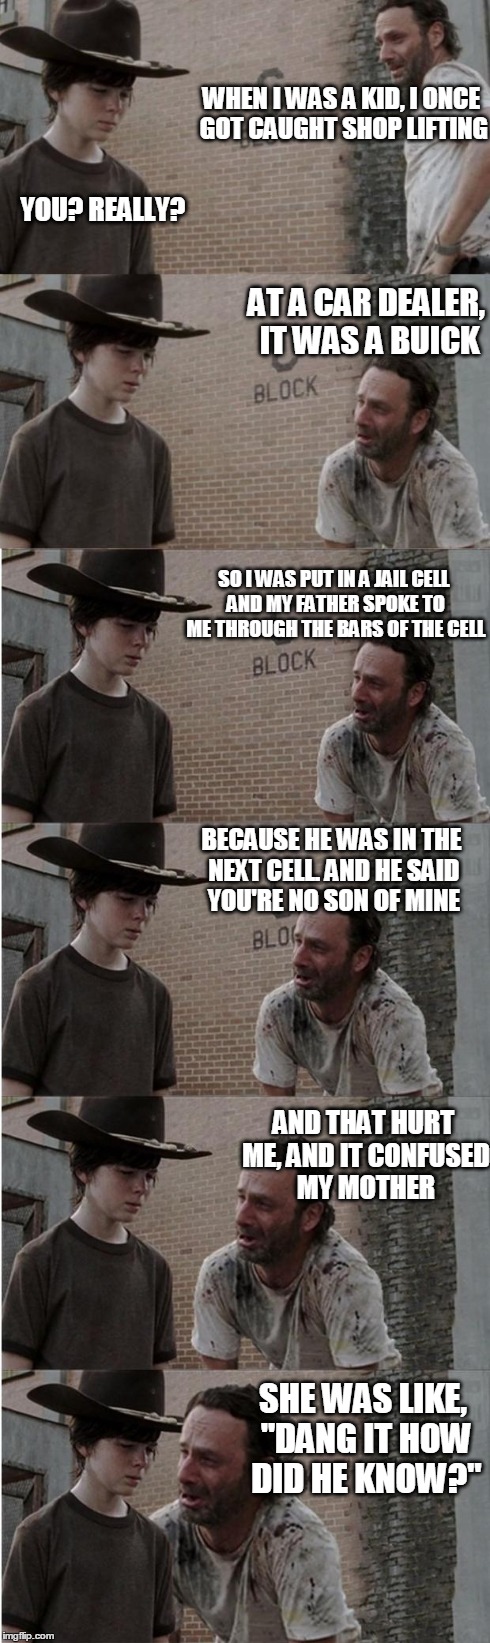 Rick and Carl Longer Meme | WHEN I WAS A KID, I ONCE GOT CAUGHT SHOP LIFTING AT A CAR DEALER, IT WAS A BUICK SO I WAS PUT IN A JAIL CELL AND MY FATHER SPOKE TO ME THROU | image tagged in memes,rick and carl longer | made w/ Imgflip meme maker